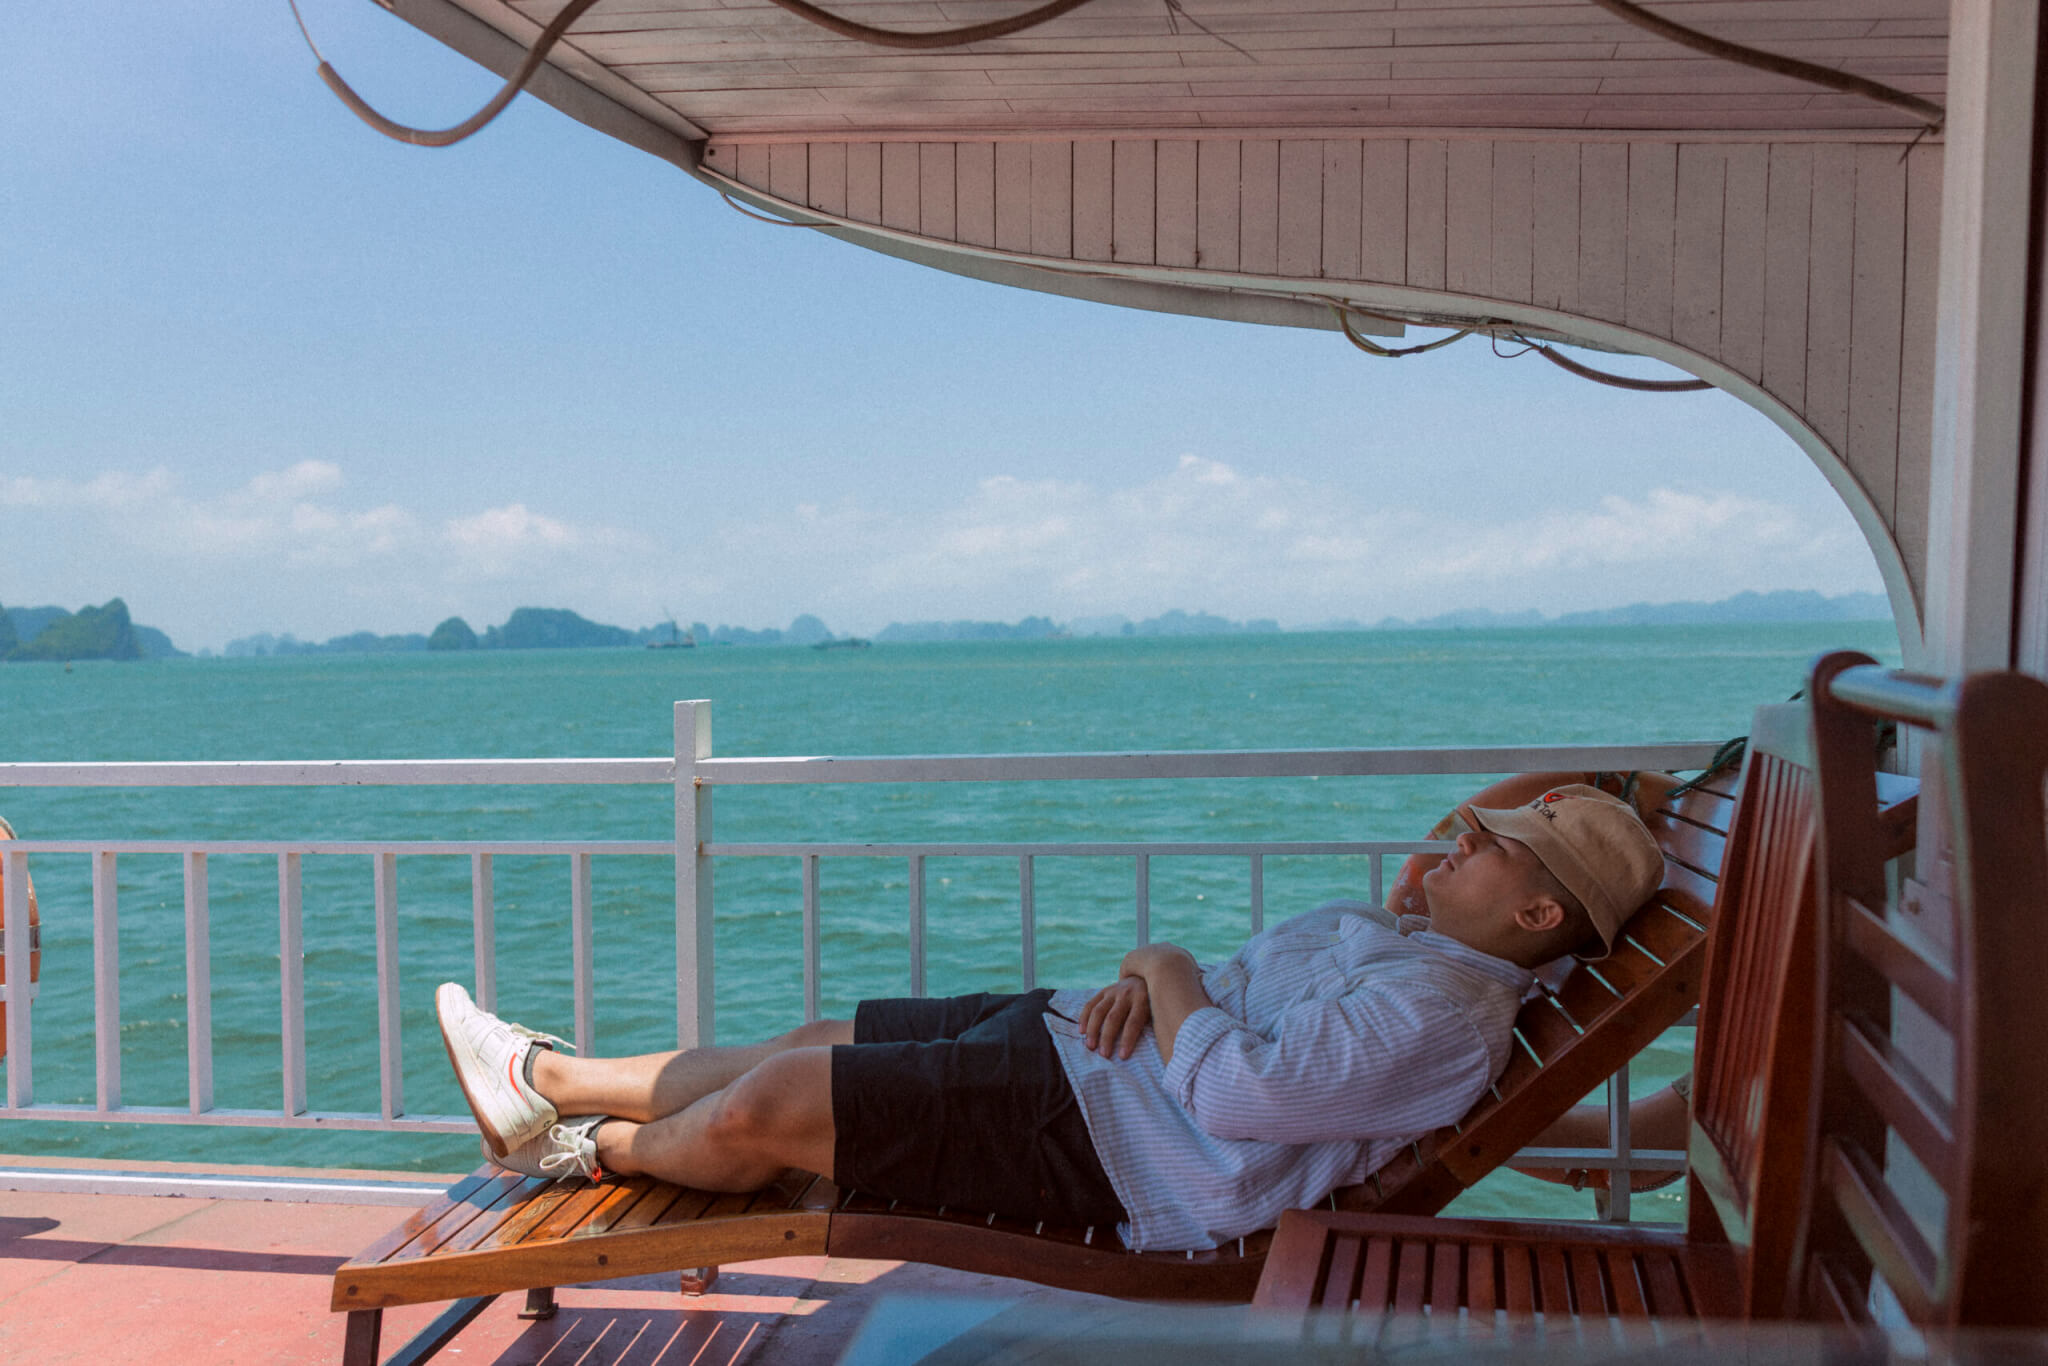 Photo of a man sleeping in a lounger on a boat